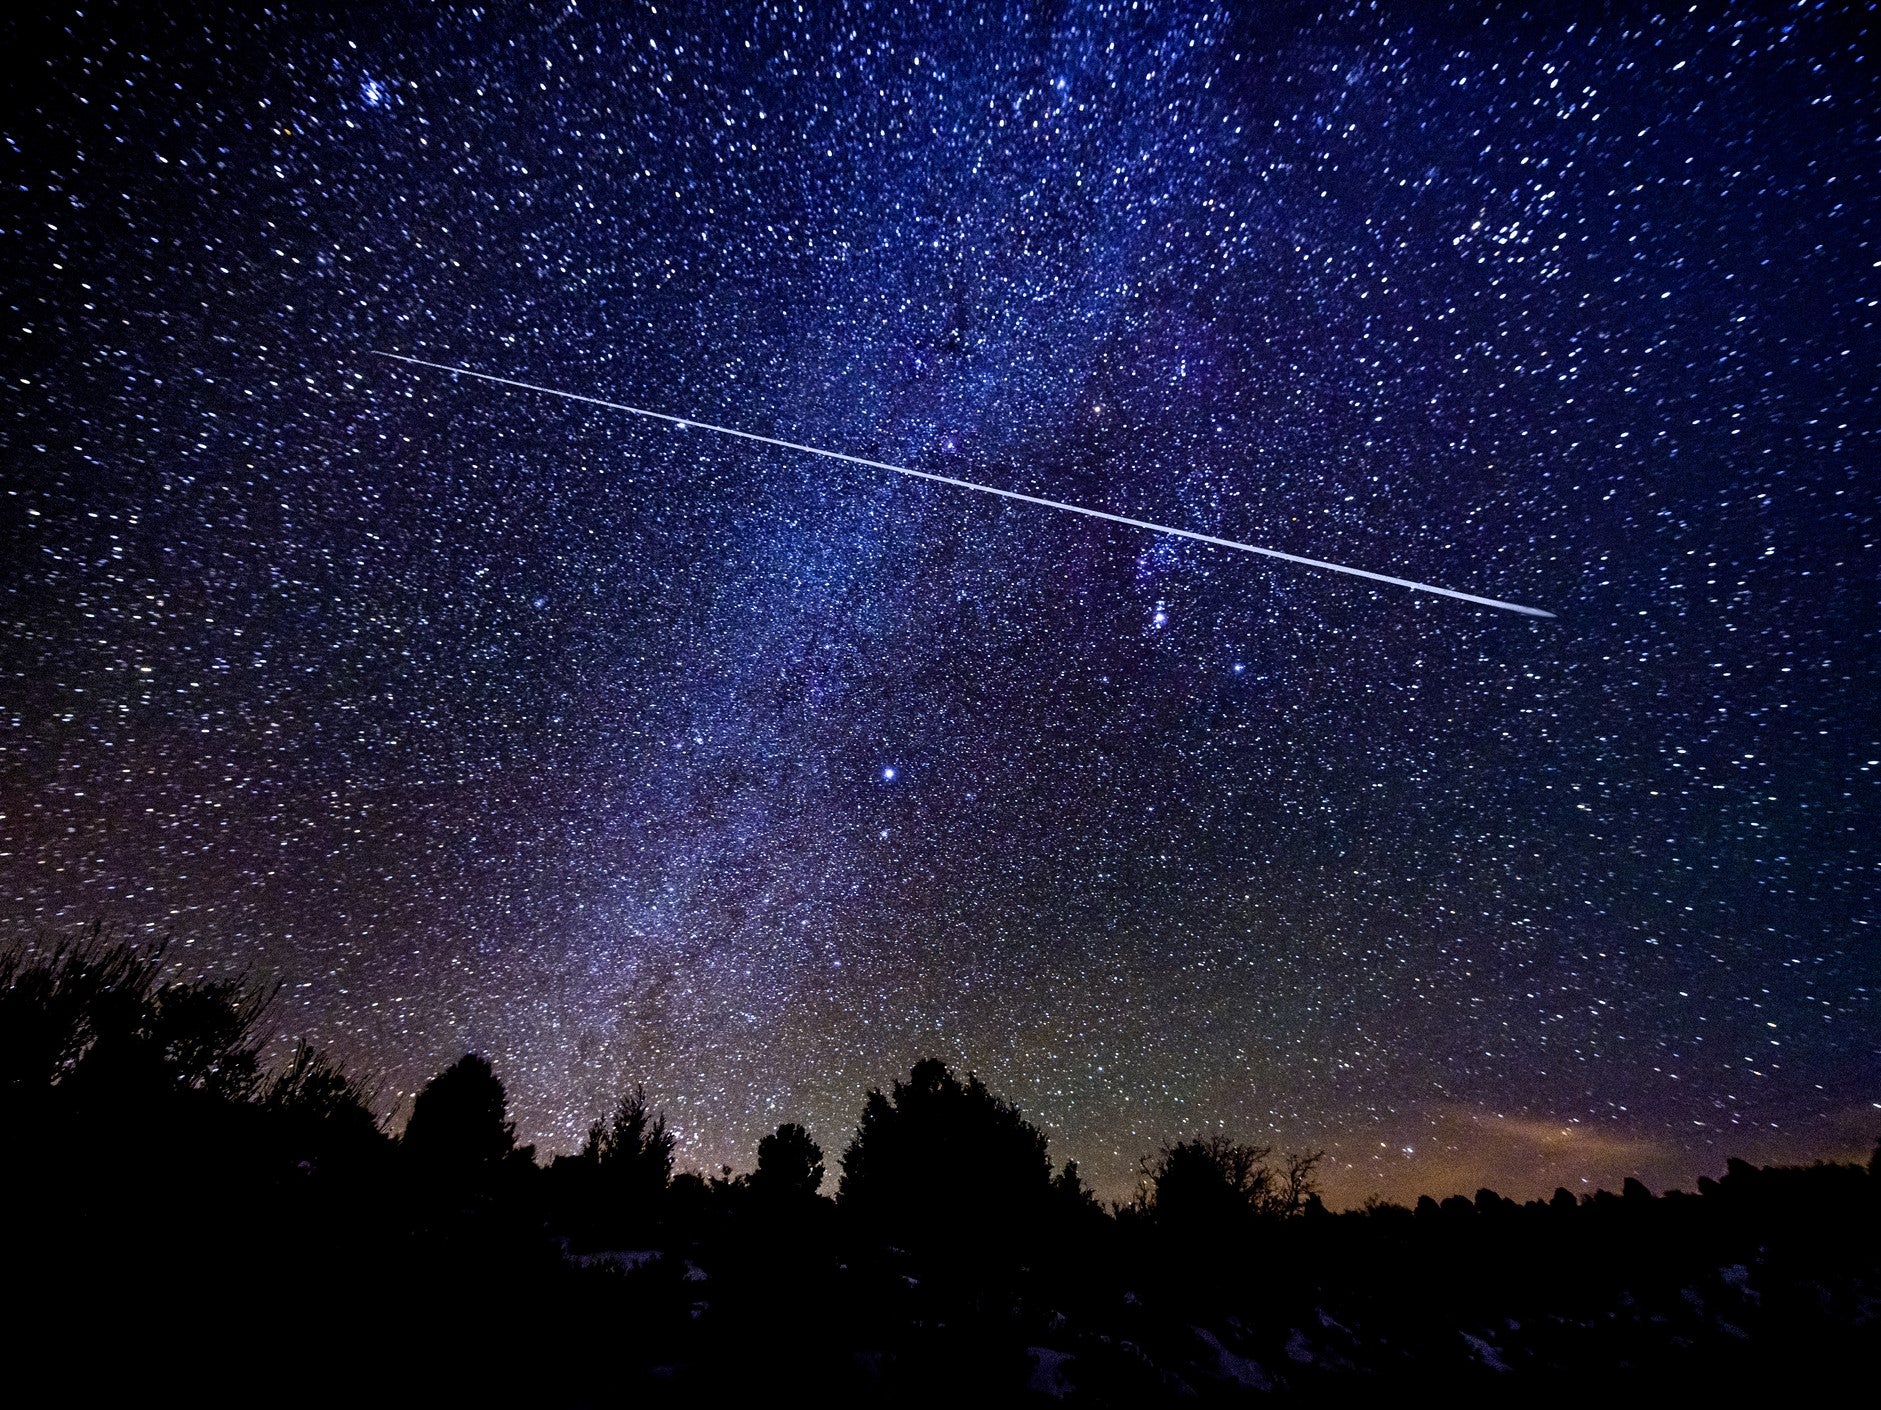 The Ursid meteor shower peaks on 21-22 December, 2021, coinciding with the Winter Solstice